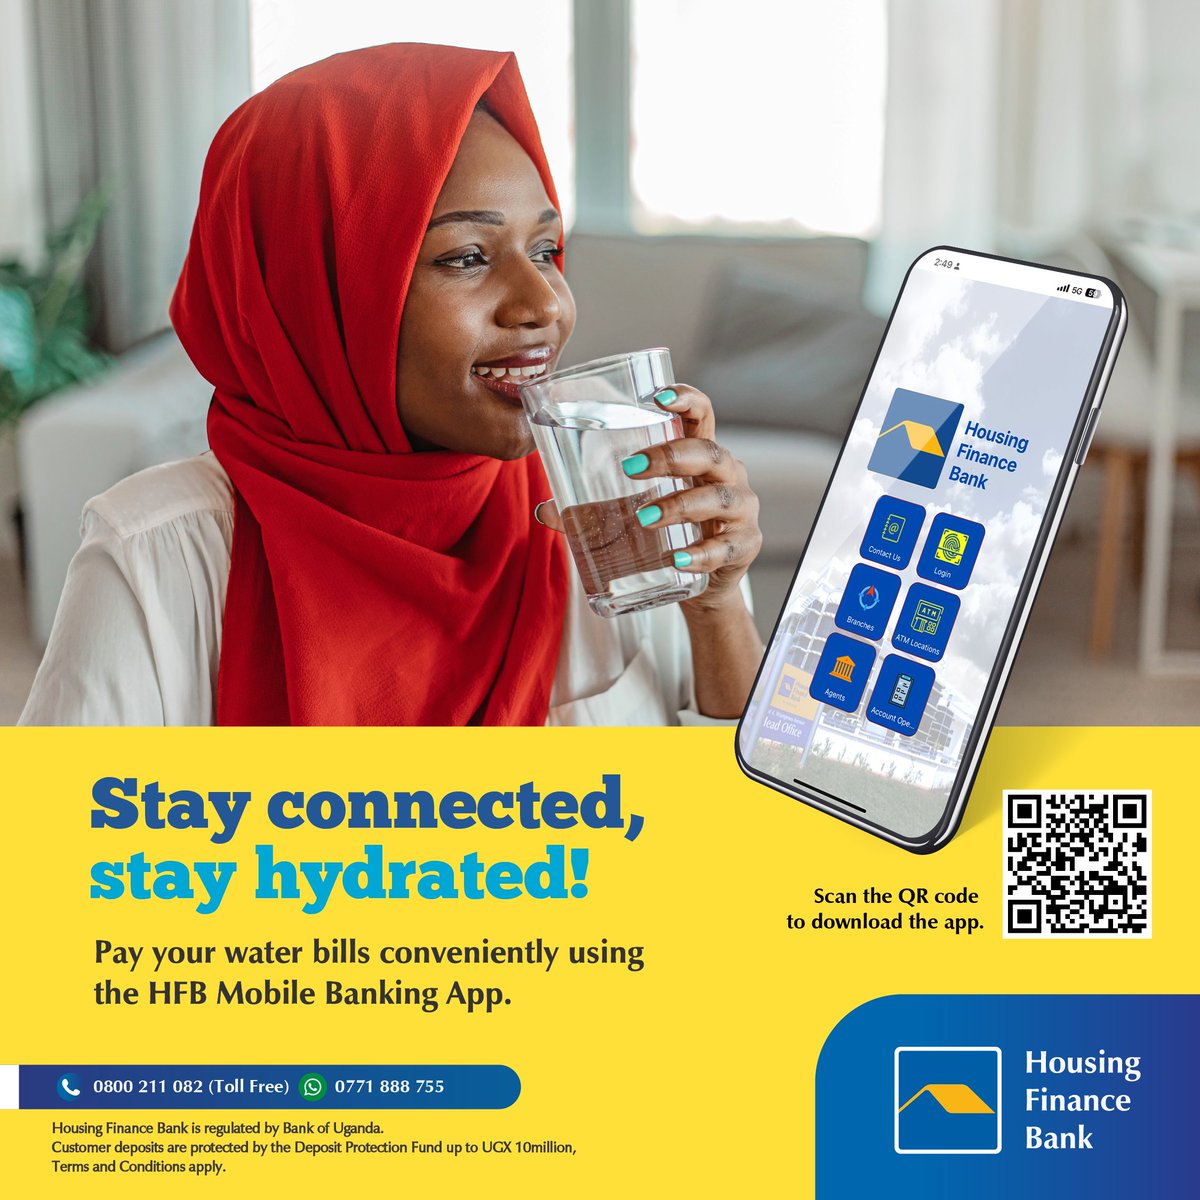 Water is life. Pay your bills instantly using the #HFBMobileBankingApp to keep the water flowing in your home.

#WeMakeItEasy @housingfinanceU